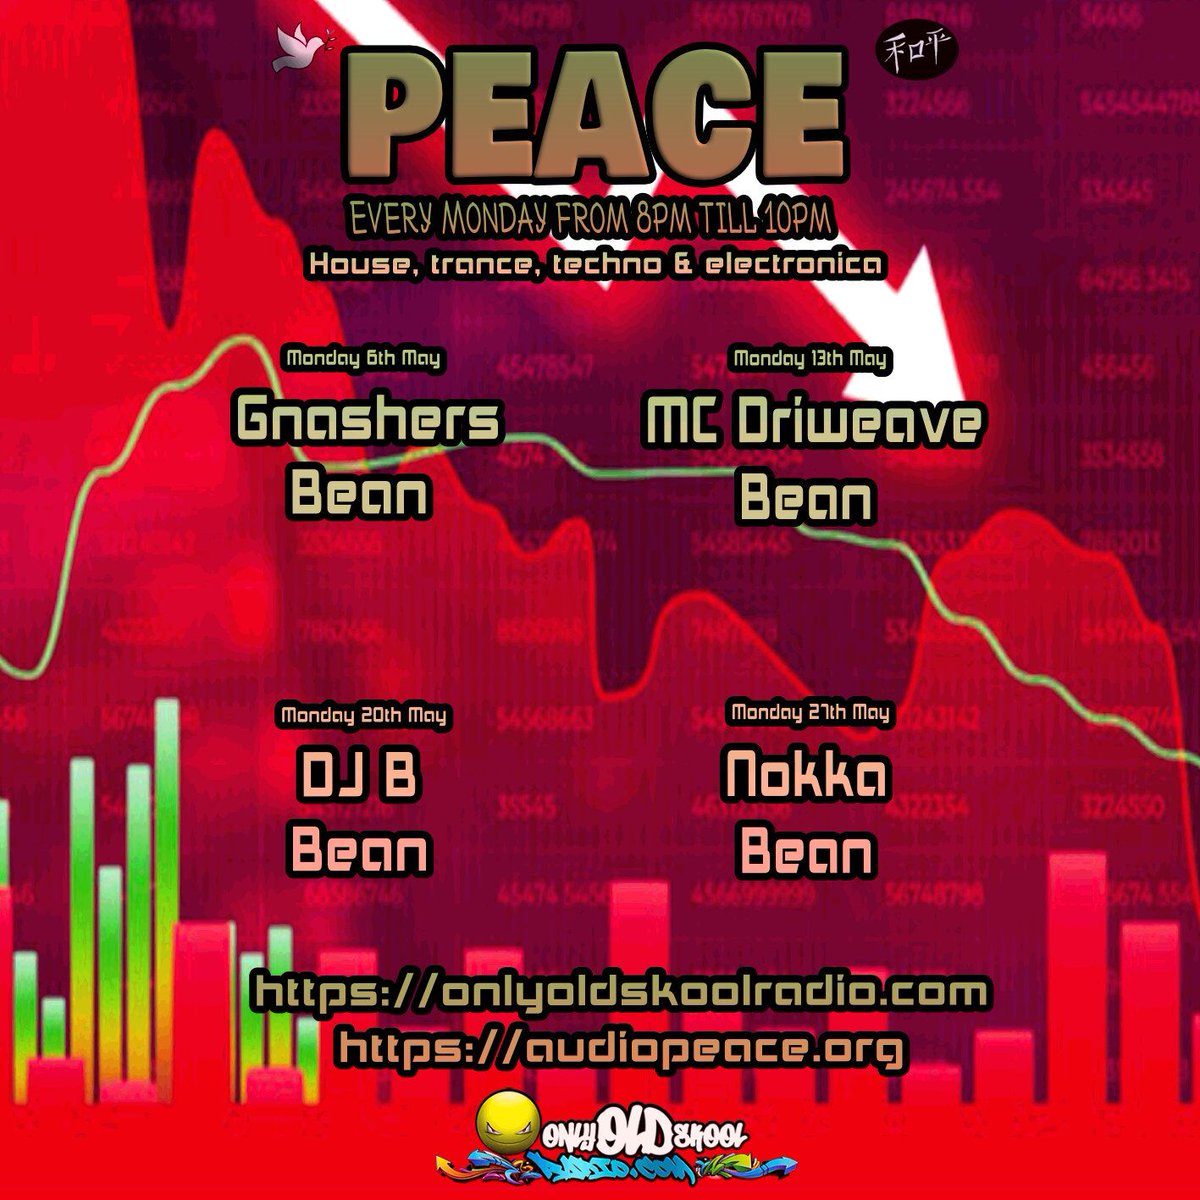 Peace is back with the finest house and trance from our wicked djs, every Monday 8-10pm so get locked and turn it up!! 😎 

linktr.ee/OnlyOldSkoolRa…
#onlyoldskool #oldskool #onlyoldskoolradio #oldskoolmusic #oldschool #house #techno #rave #uktechno #technodj #trance